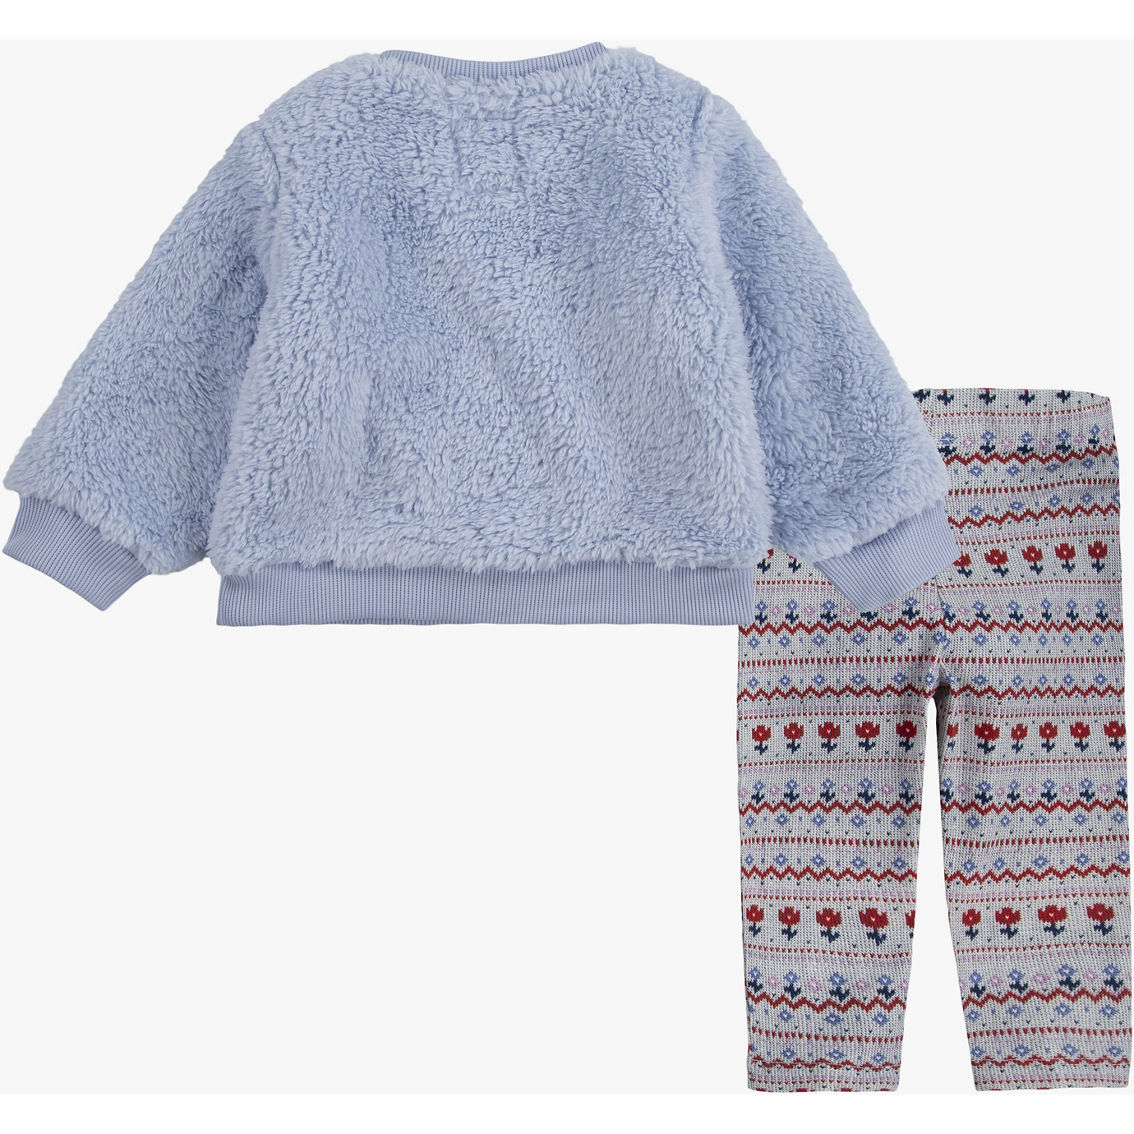 Levi's Baby Girls Knit Top and Leggings 2 pc. Set - Image 2 of 3